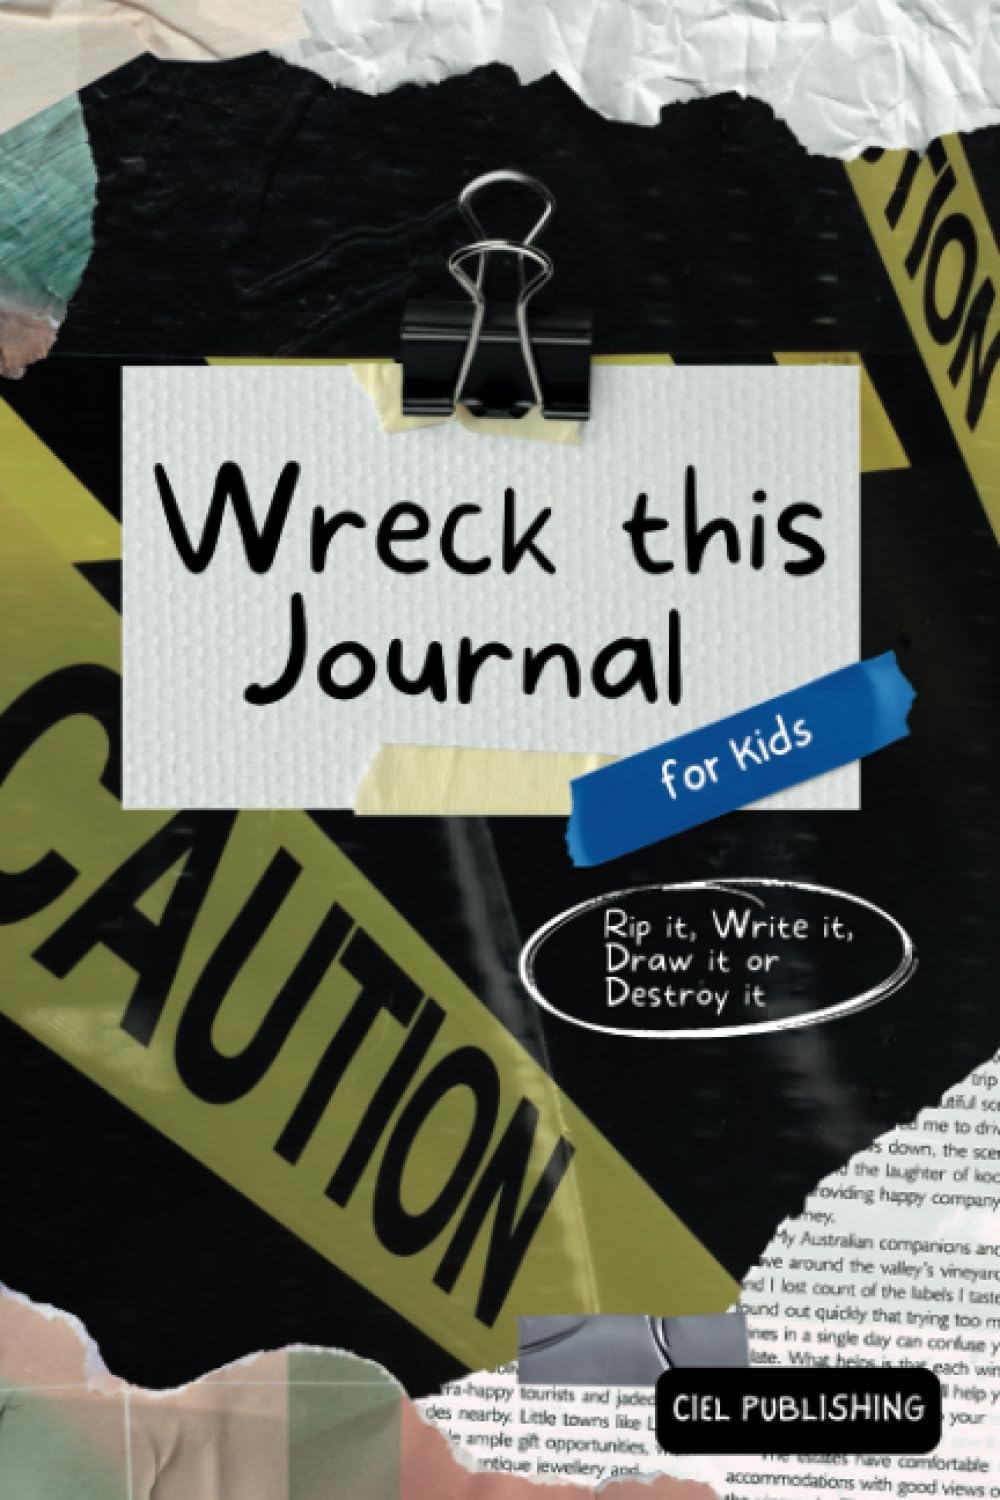 Wreck This Journal for Kids: Rip it, Write it, Draw it or Destroy it